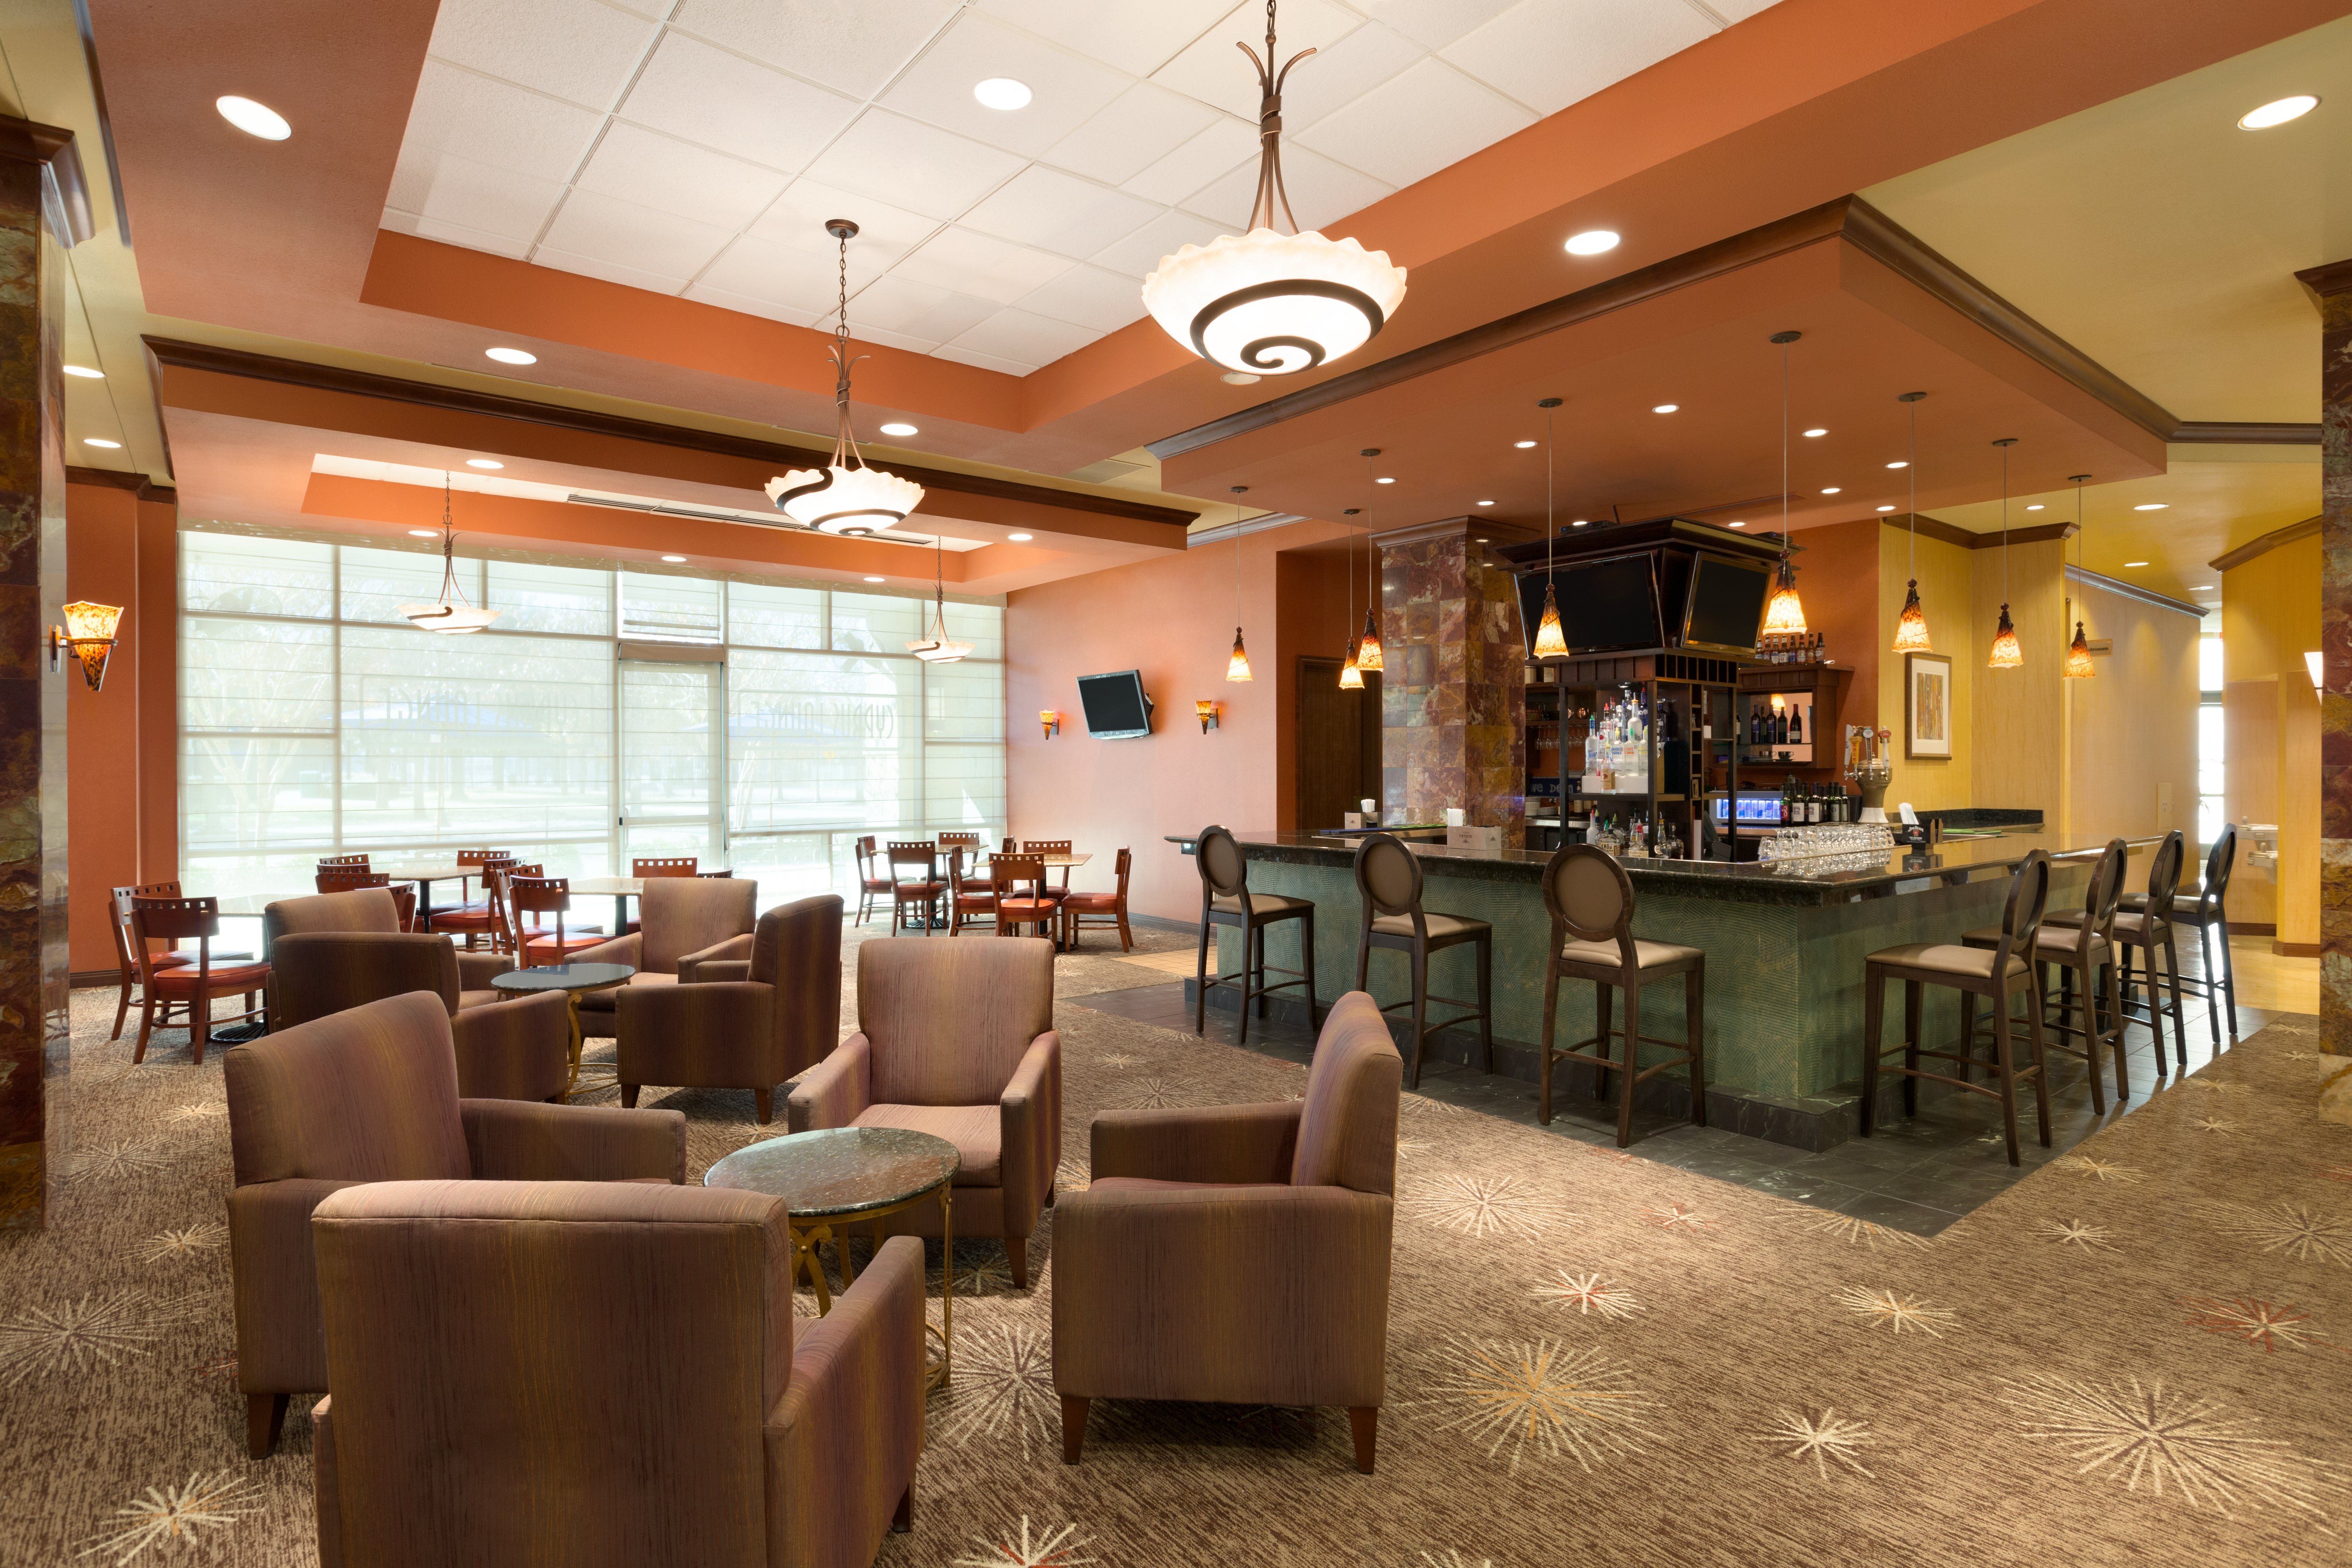 Cyprus Grille Bar And Lounge